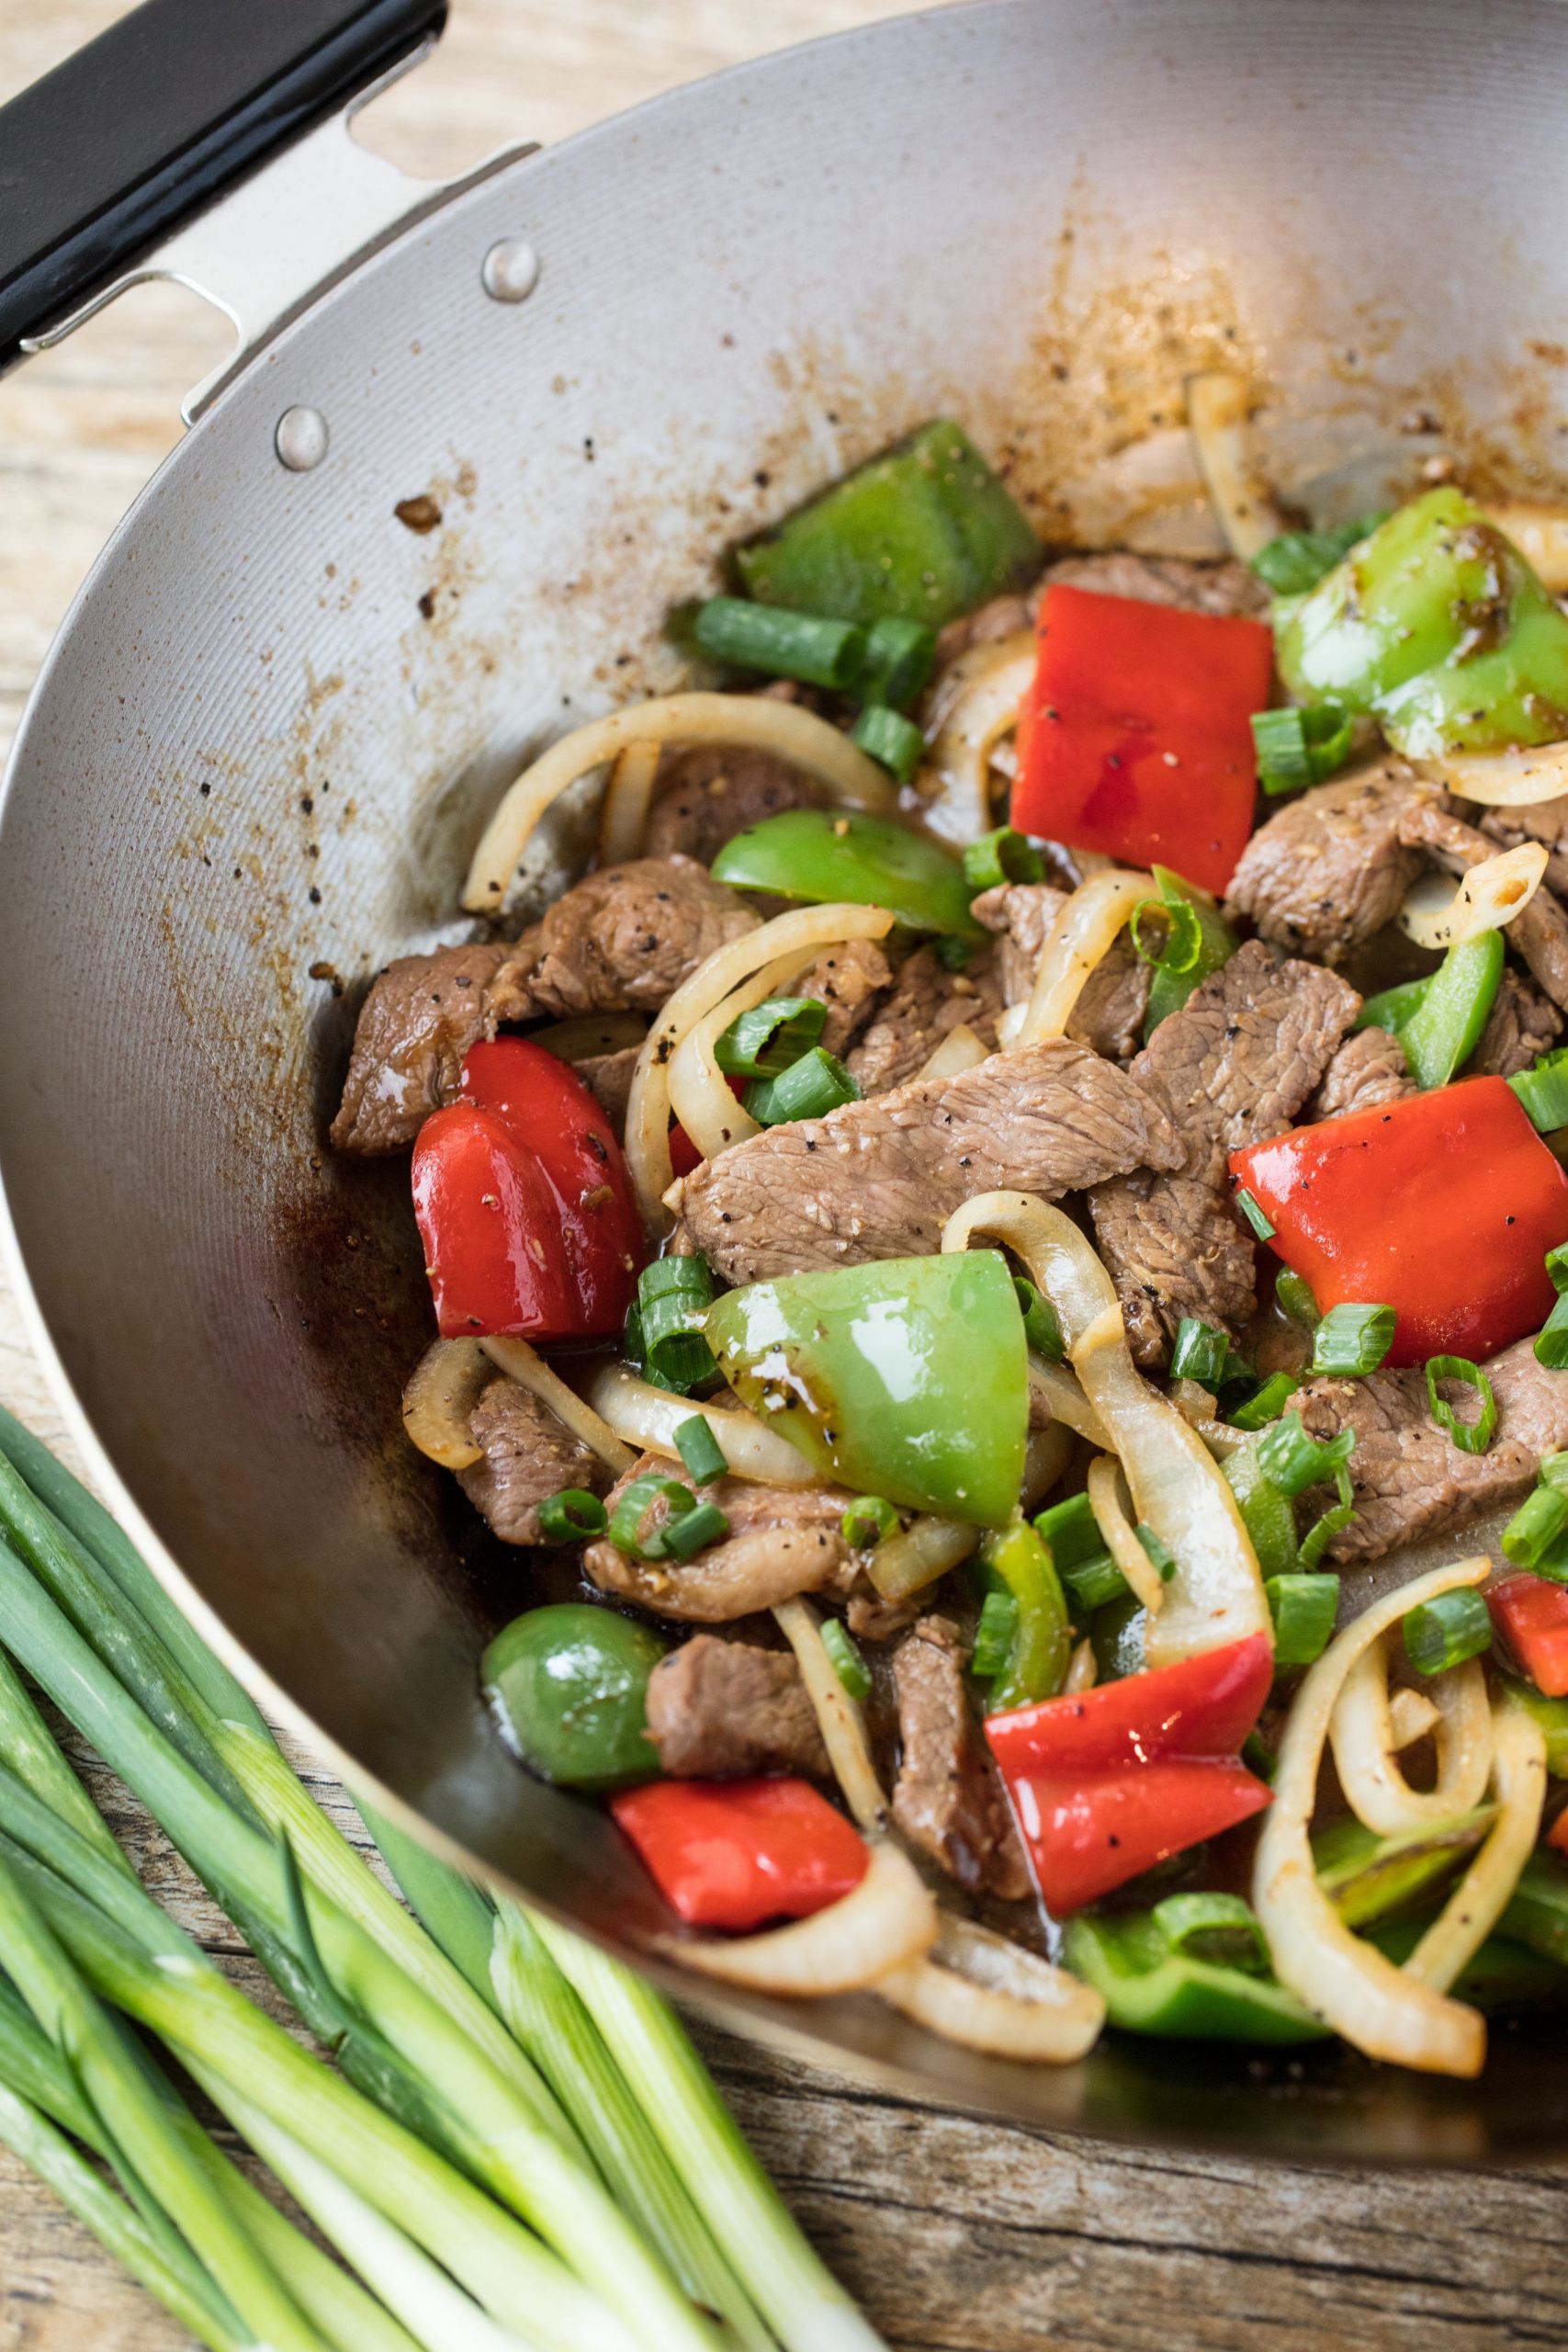 Authentic Chinese Pepper Steak Recipes
 Easy Chinese Pepper Steak Recipe